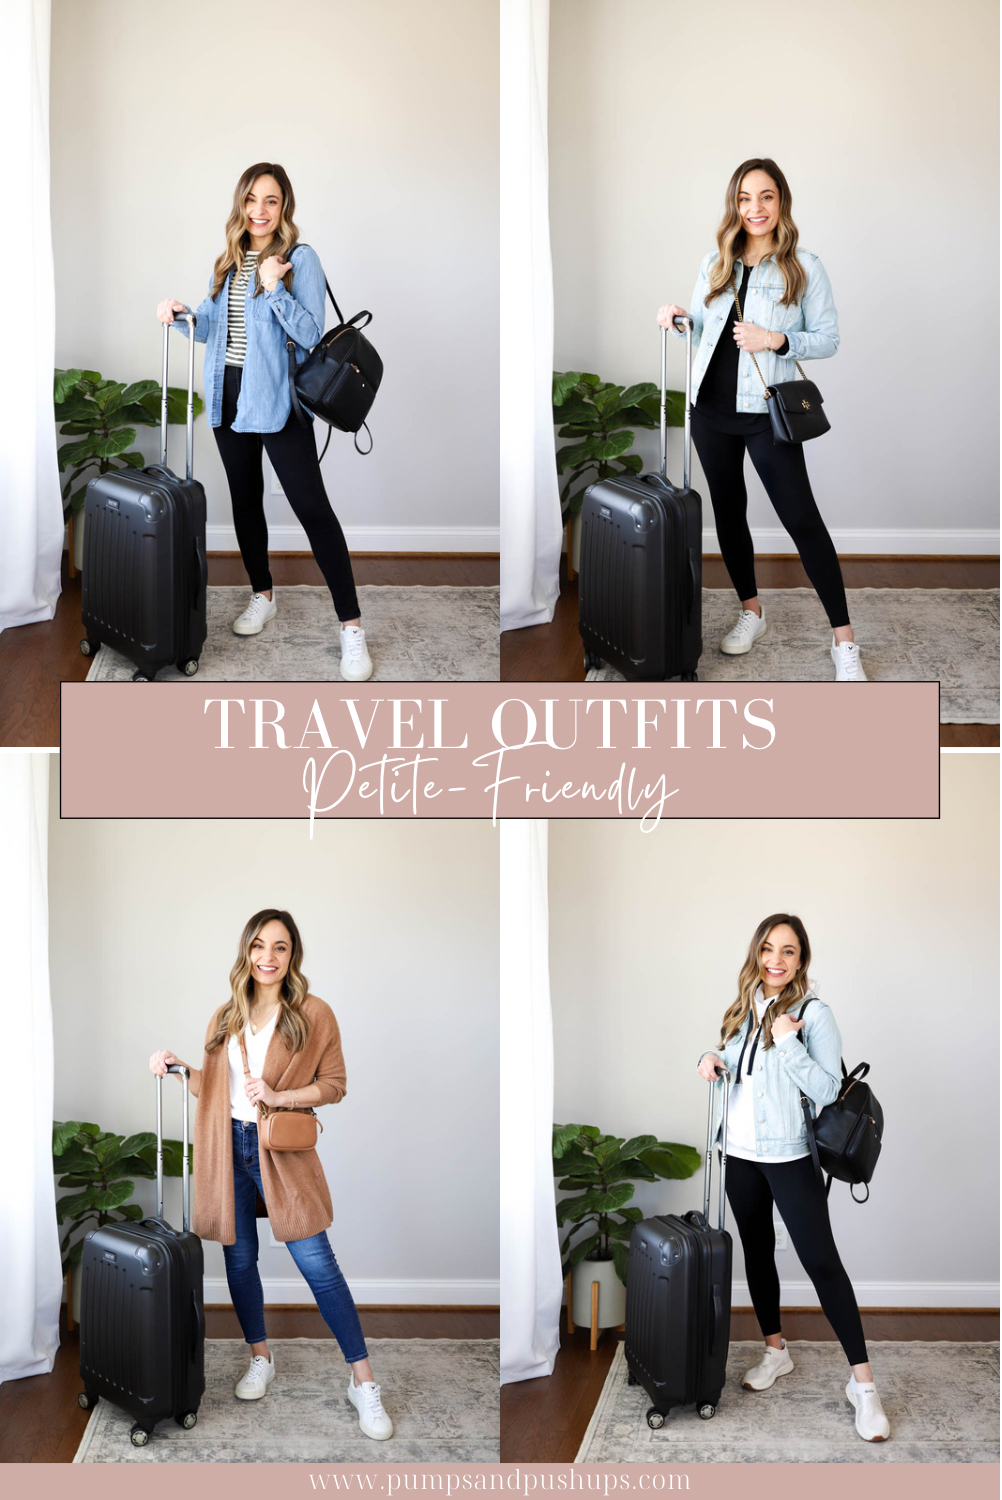 Airport Outfit Ideas That Are Comfy Yet Stylish - Trendy Tourist